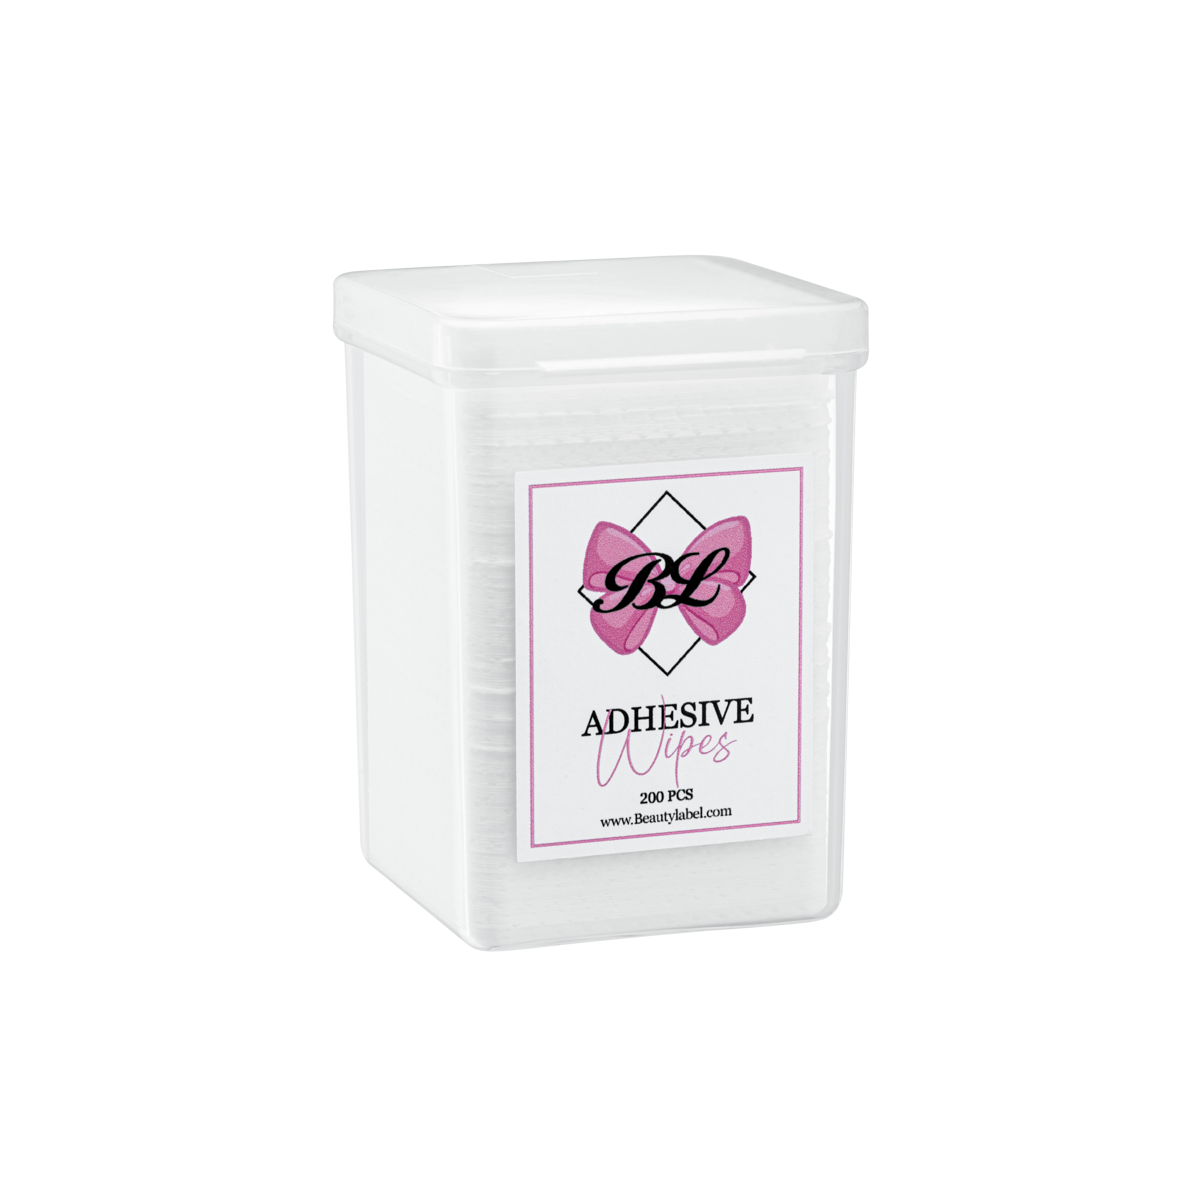 Beauty Label adhesive wipes